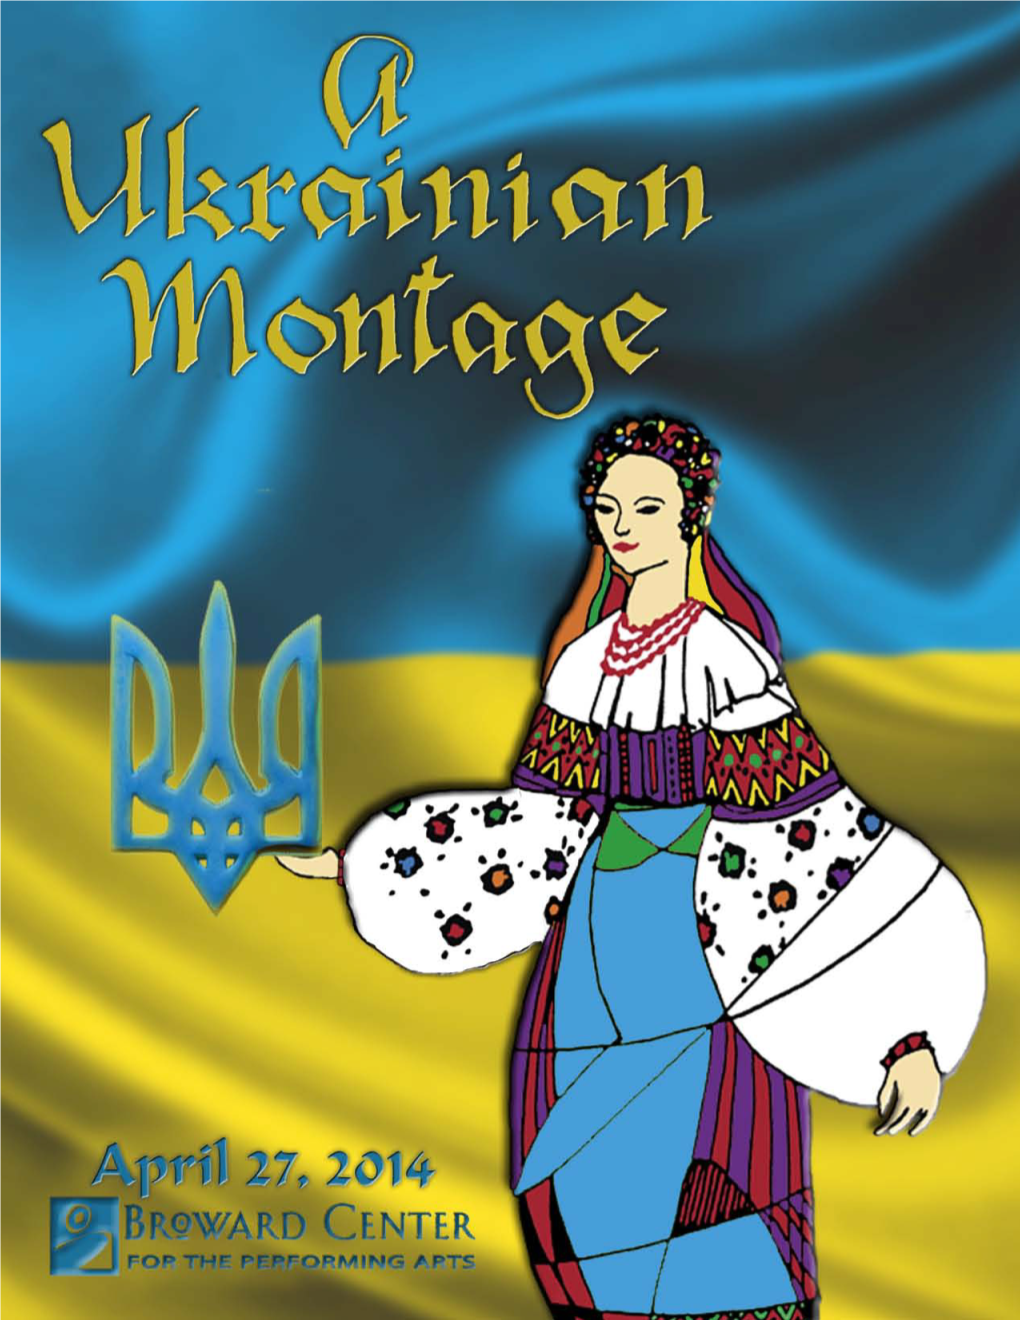 BEST WISHES to the UKRAINIAN DANCERS of MIAMI UKRAINIAN DANCERS at MONTAGE! on Your 22Nd Annual Montage